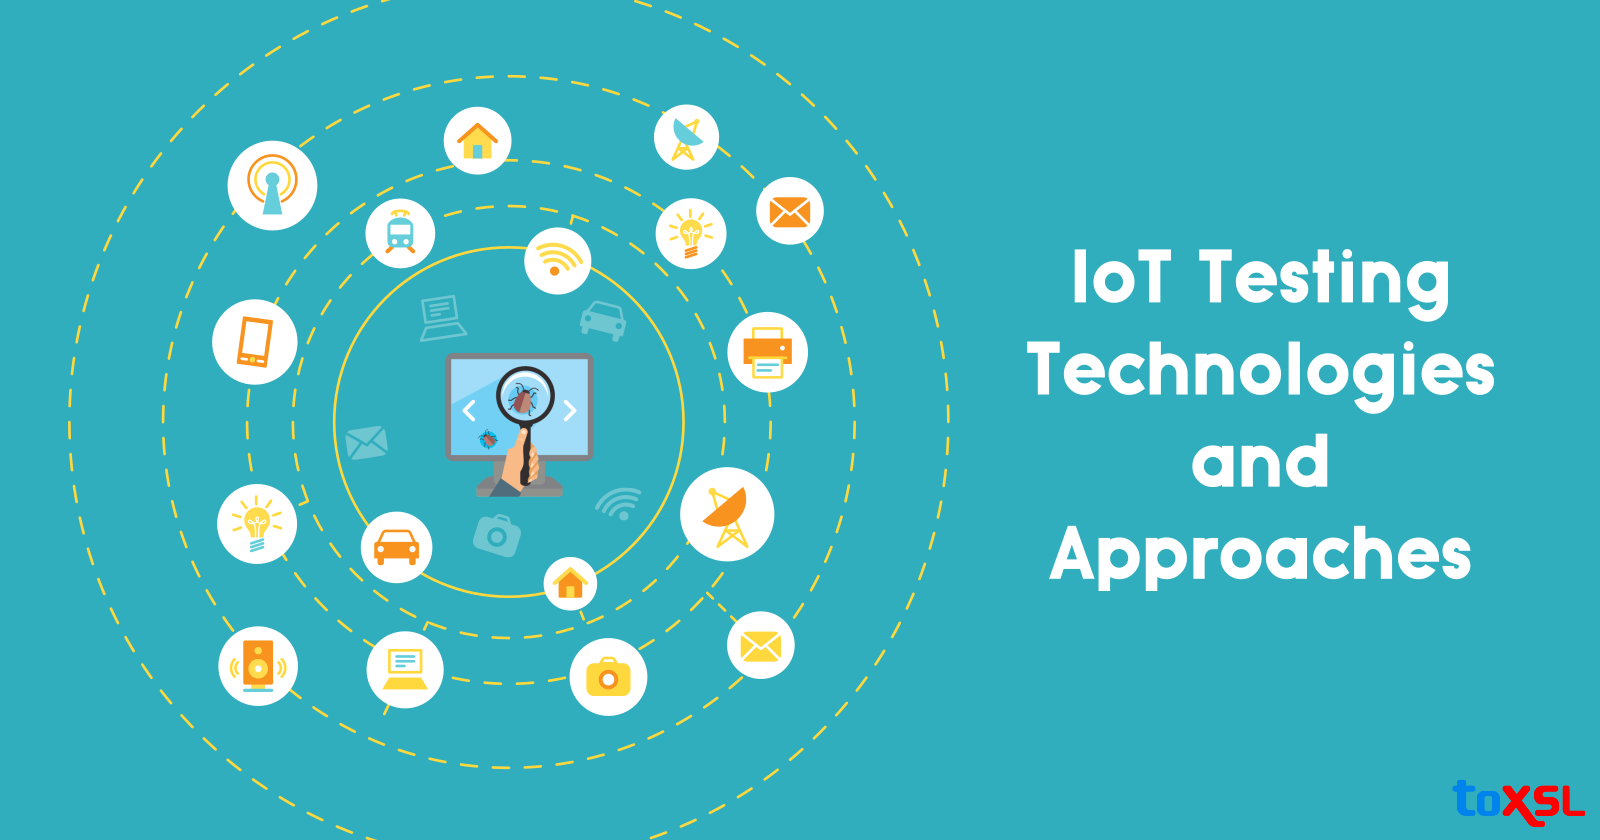 An Insight Into the IoT Testing Technologies and Approaches